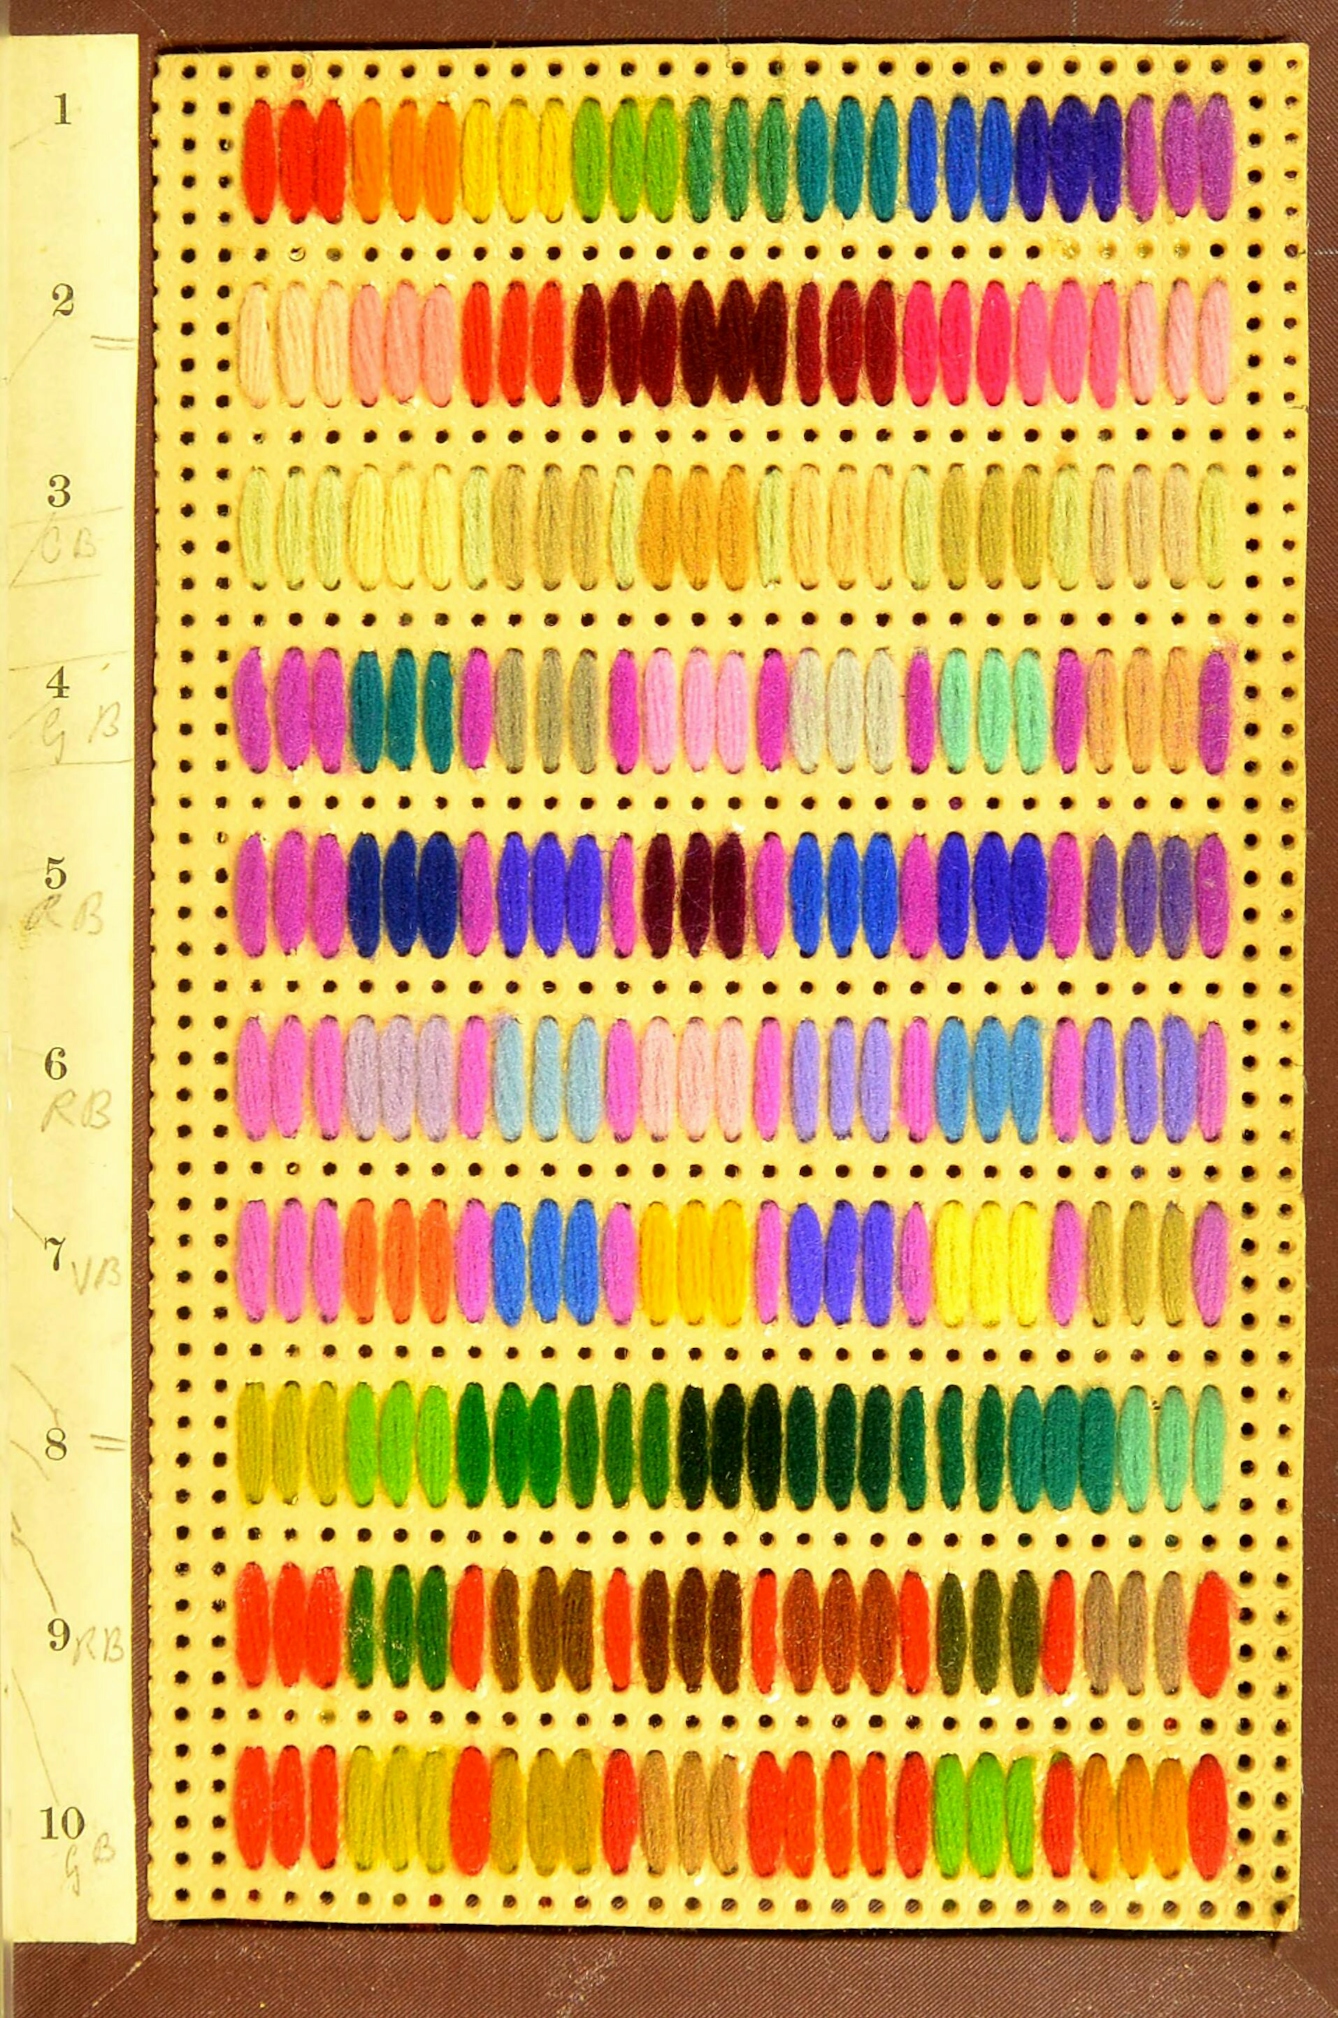 A yellow card pierced with a grid of small holes. Different coloured wool yarns are threaded through the holes in 10 rows. The colours show gradual variations of e.g. green yarns in one row and conrasts of red, yellow and orrange yarns in another.